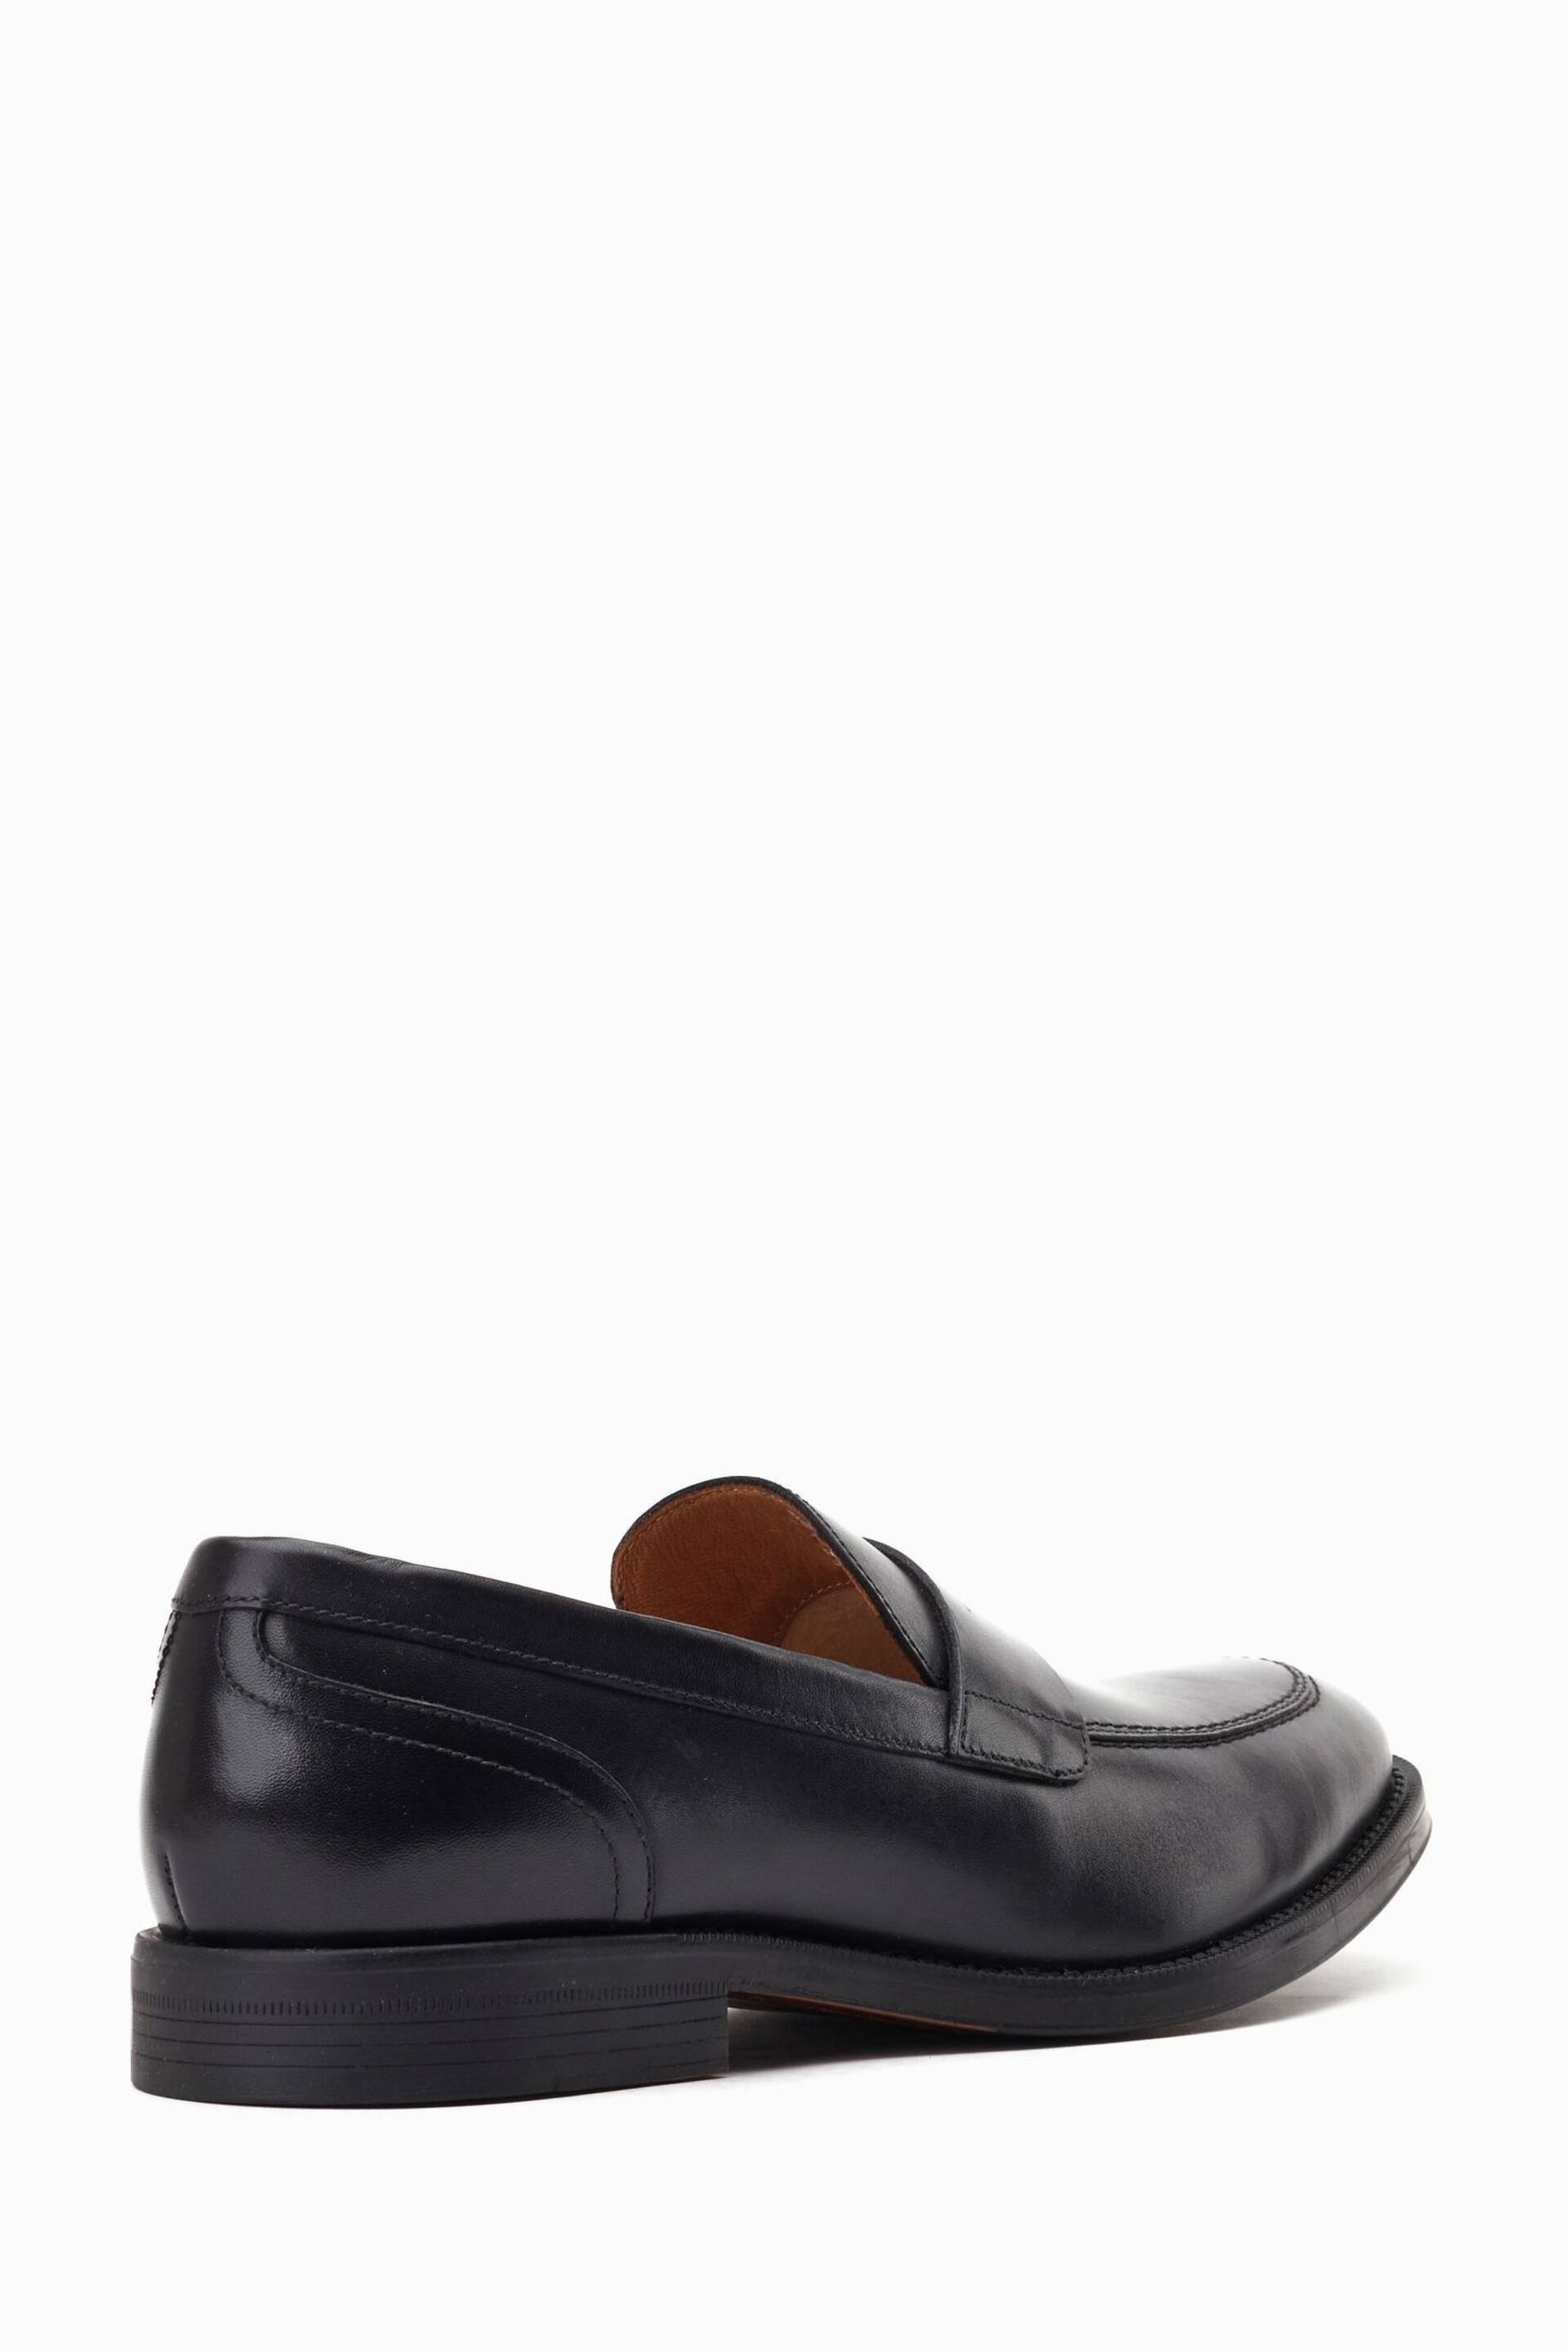 Base London Kennedy Slip On Penny Loafers - Image 2 of 6